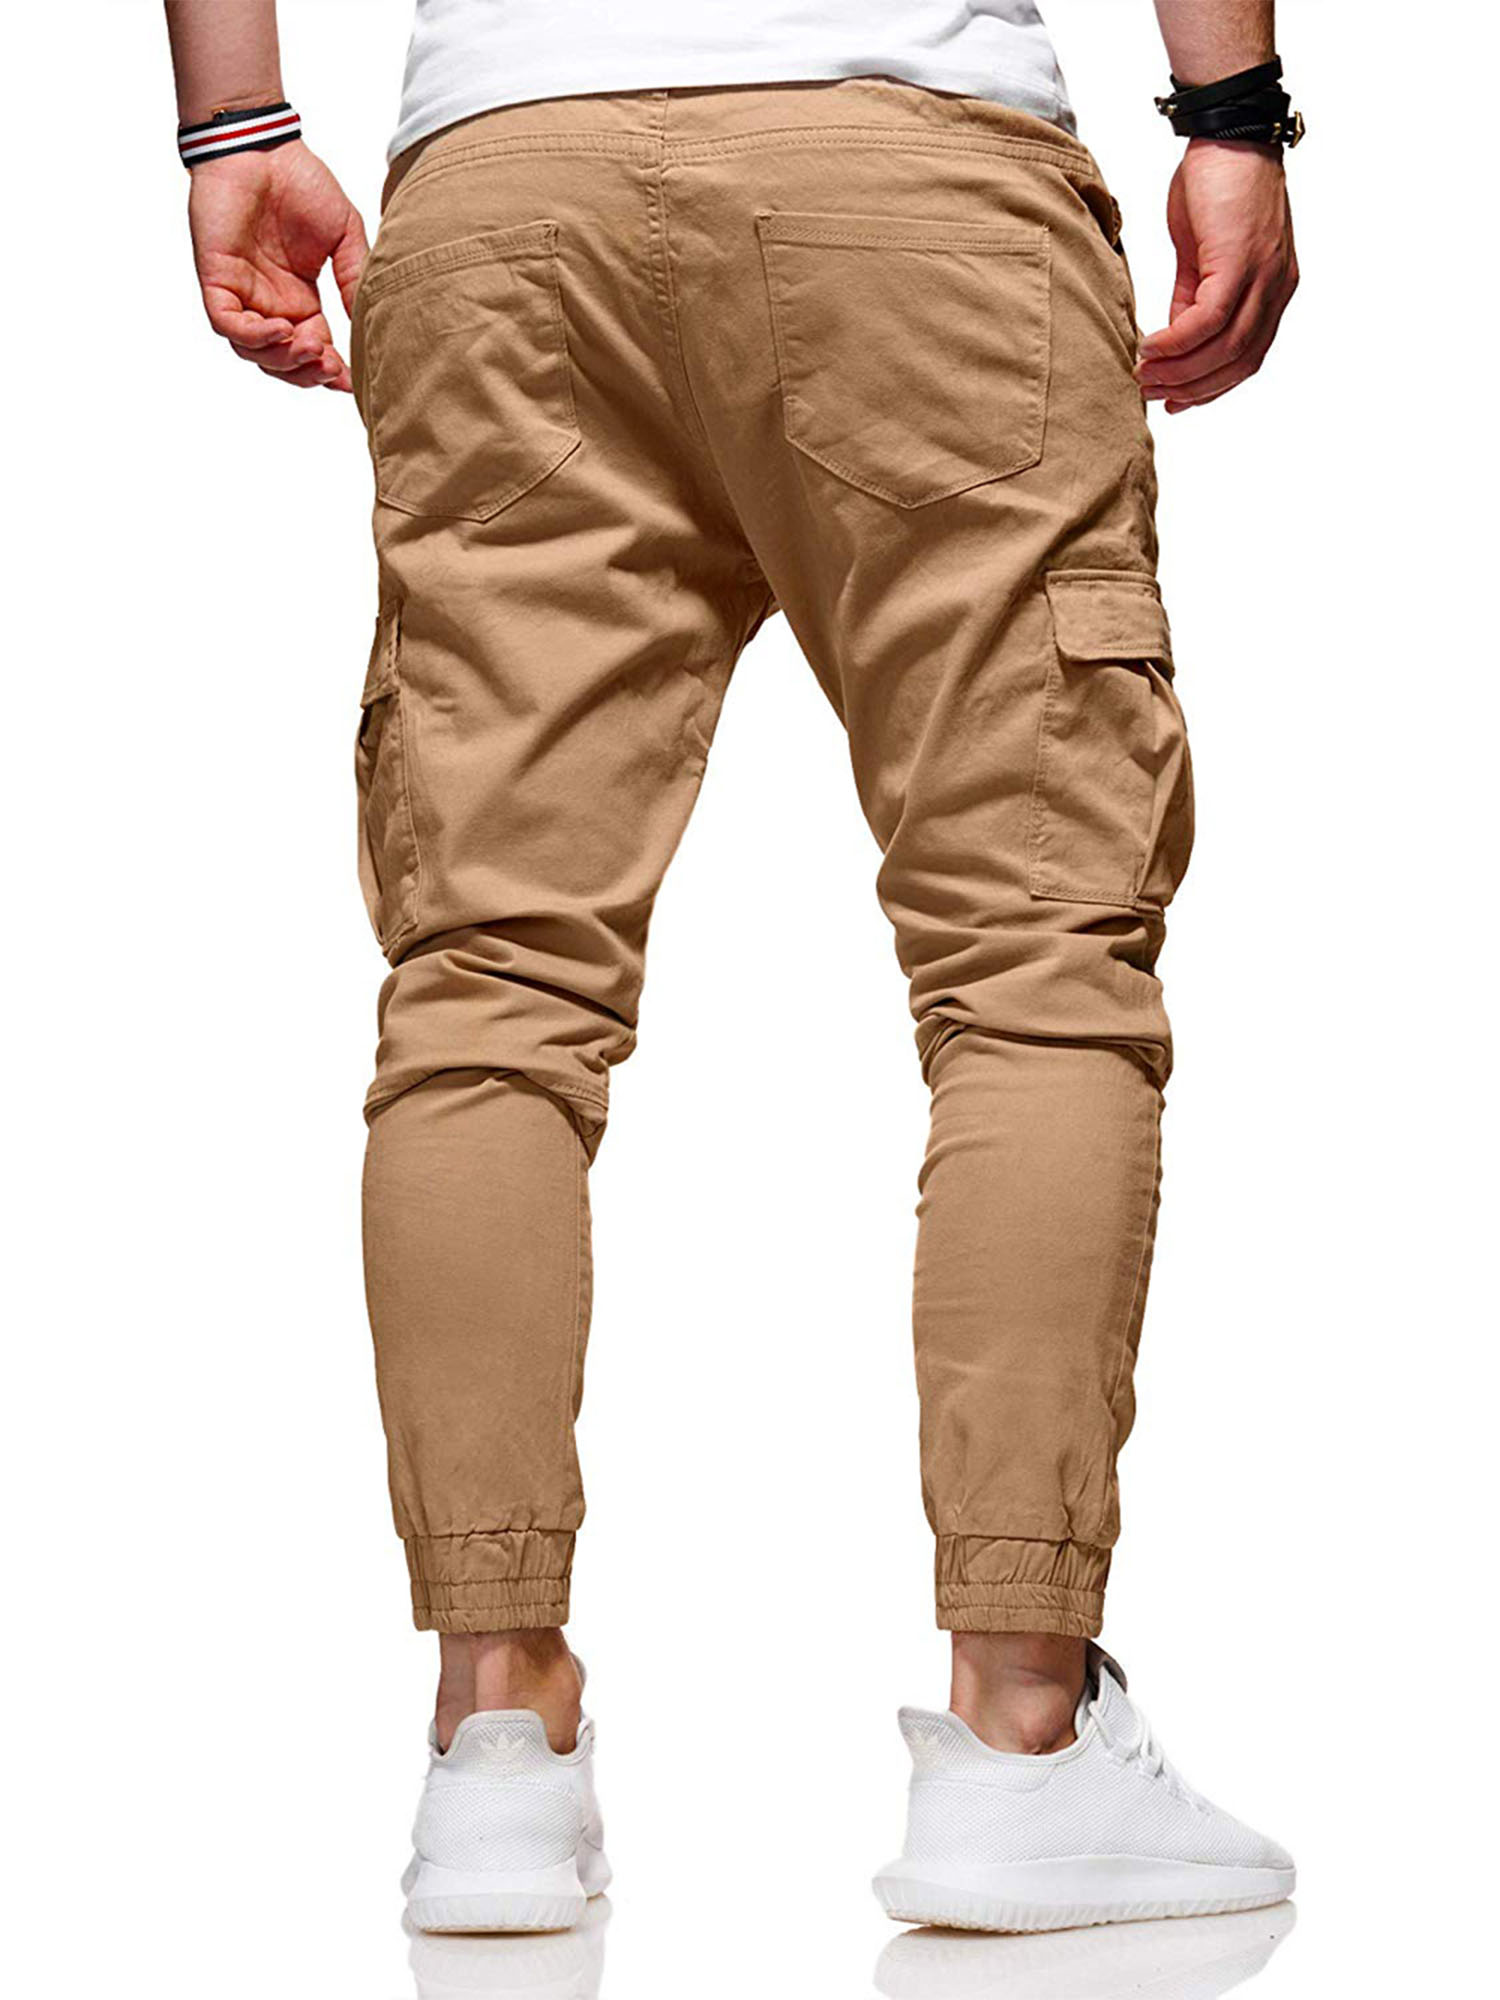 Mens Fashion Loose Sweatpants Elastic Waist Jogging Sports Pant Fitness Solid Color Casual Cargo Trousers